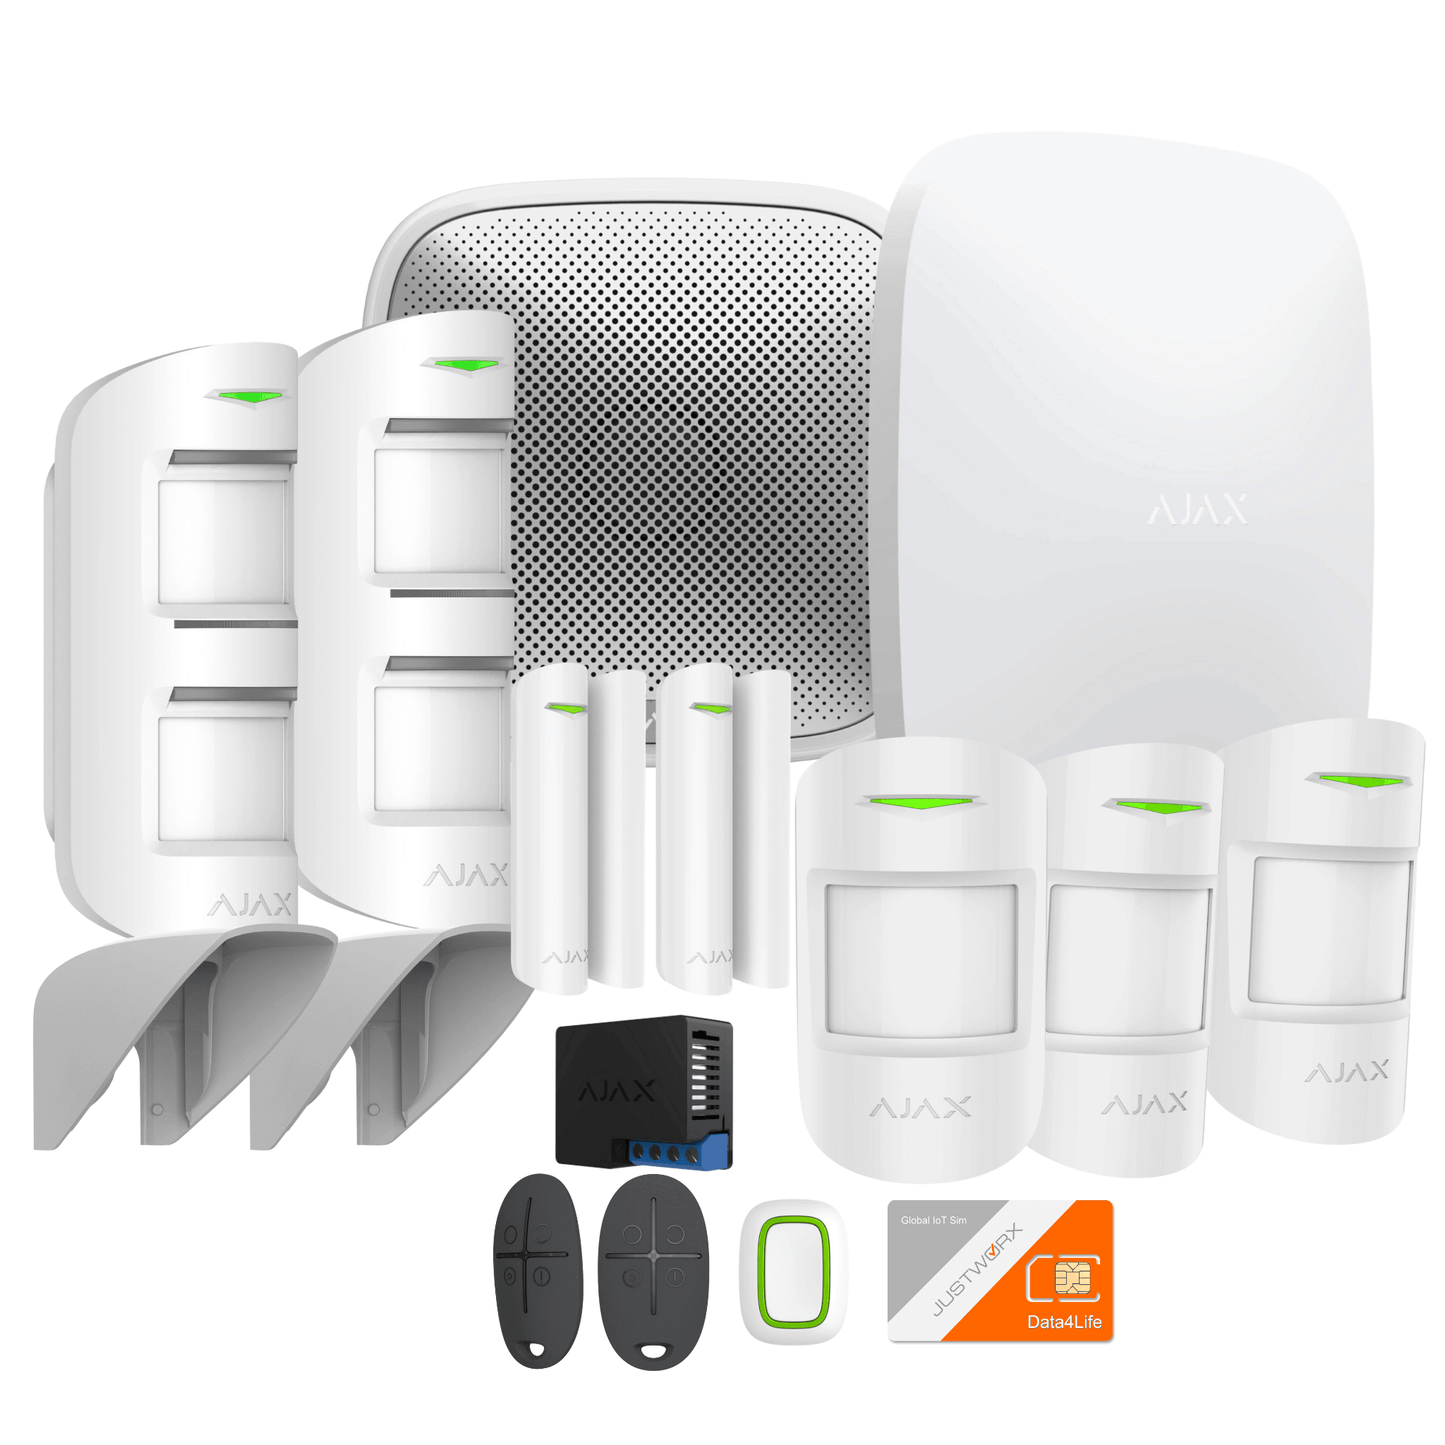 Ajax Family Outdoor Kit - A  Combination of Outdoor and Indoor Security